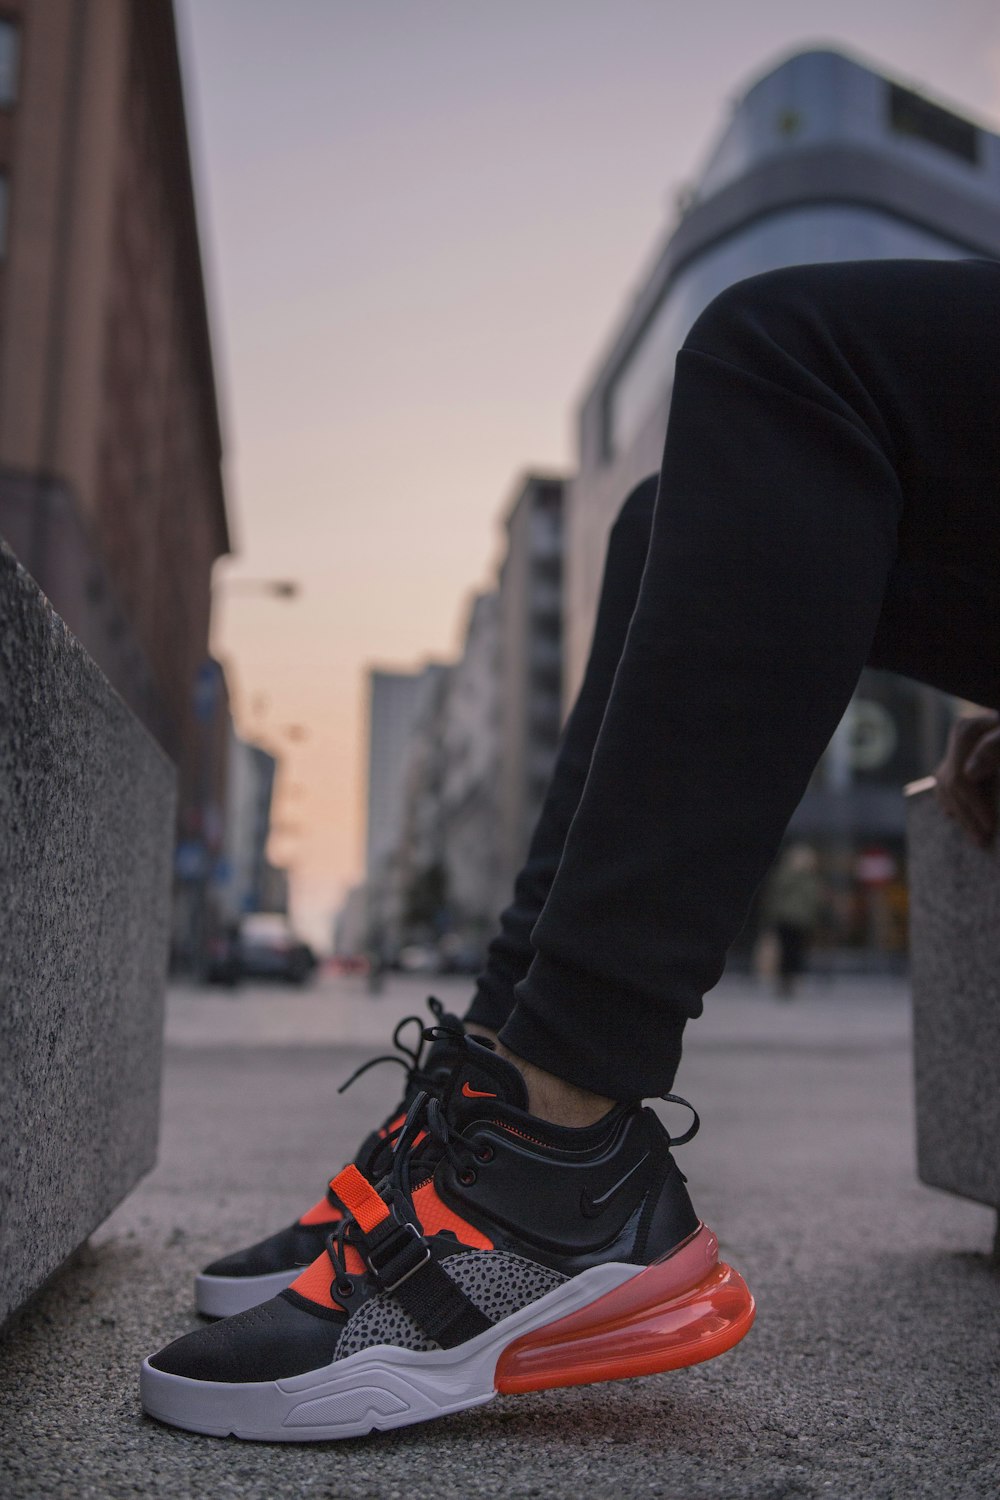 person wearing black-and-gray Nike Air Max 270 shoes